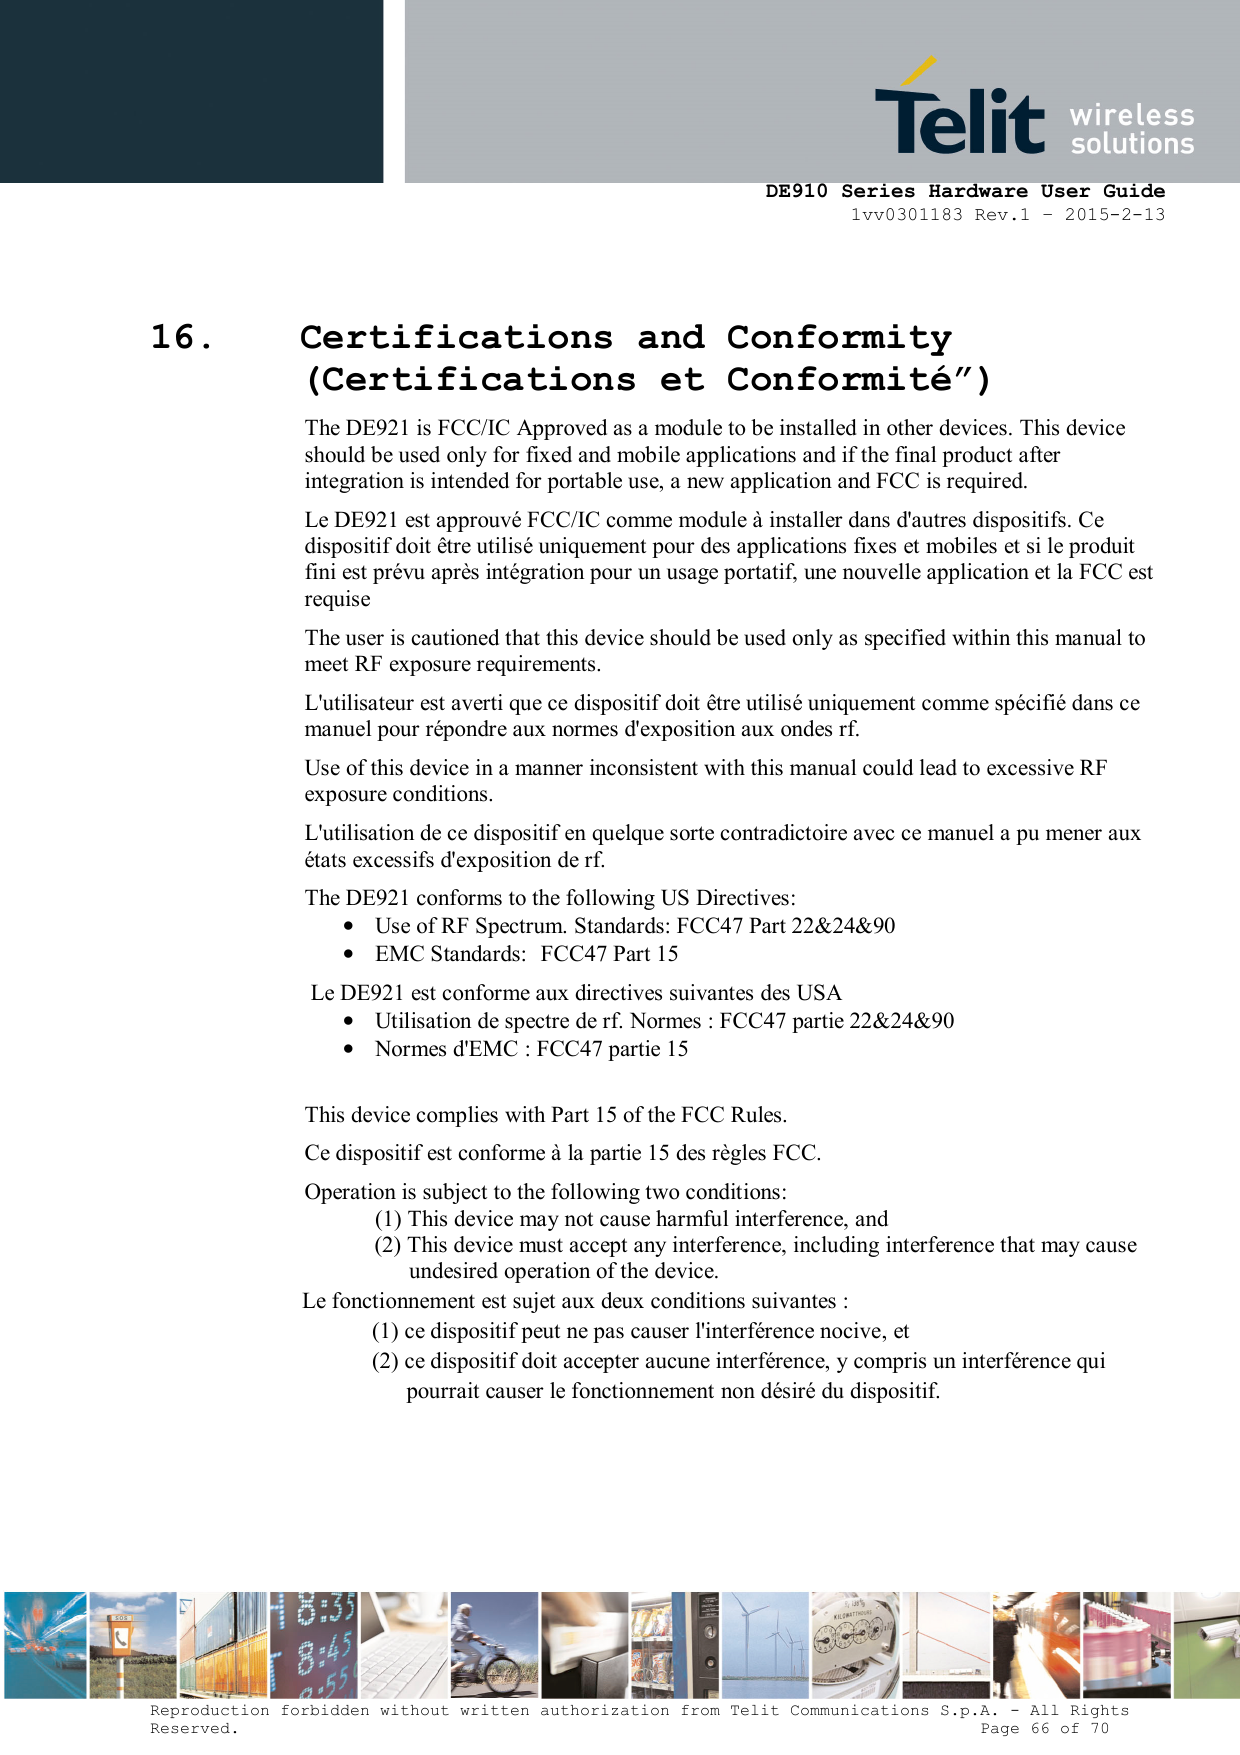      DE910 Series Hardware User Guide 1vv0301183 Rev.1 – 2015-2-13 Reproduction forbidden without written authorization from Telit Communications S.p.A. - All Rights Reserved.                                                                          Page 66 of 70 16. Certifications and Conformity (Certifications et Conformité”) The DE921 is FCC/IC Approved as a module to be installed in other devices. This device should be used only for fixed and mobile applications and if the final product after integration is intended for portable use, a new application and FCC is required. Le DE921 est approuvé FCC/IC comme module à installer dans d&apos;autres dispositifs. Ce dispositif doit être utilisé uniquement pour des applications fixes et mobiles et si le produit fini est prévu après intégration pour un usage portatif, une nouvelle application et la FCC est requise The user is cautioned that this device should be used only as specified within this manual to meet RF exposure requirements.  L&apos;utilisateur est averti que ce dispositif doit être utilisé uniquement comme spécifié dans ce manuel pour répondre aux normes d&apos;exposition aux ondes rf. Use of this device in a manner inconsistent with this manual could lead to excessive RF exposure conditions. L&apos;utilisation de ce dispositif en quelque sorte contradictoire avec ce manuel a pu mener aux états excessifs d&apos;exposition de rf. The DE921 conforms to the following US Directives: • Use of RF Spectrum. Standards: FCC47 Part 22&amp;24&amp;90 • EMC Standards:  FCC47 Part 15 Le DE921 est conforme aux directives suivantes des USA • Utilisation de spectre de rf. Normes : FCC47 partie 22&amp;24&amp;90 • Normes d&apos;EMC : FCC47 partie 15  This device complies with Part 15 of the FCC Rules. Ce dispositif est conforme à la partie 15 des règles FCC. Operation is subject to the following two conditions: (1) This device may not cause harmful interference, and (2) This device must accept any interference, including interference that may cause undesired operation of the device. Le fonctionnement est sujet aux deux conditions suivantes : (1) ce dispositif peut ne pas causer l&apos;interférence nocive, et (2) ce dispositif doit accepter aucune interférence, y compris un interférence qui pourrait causer le fonctionnement non désiré du dispositif.      